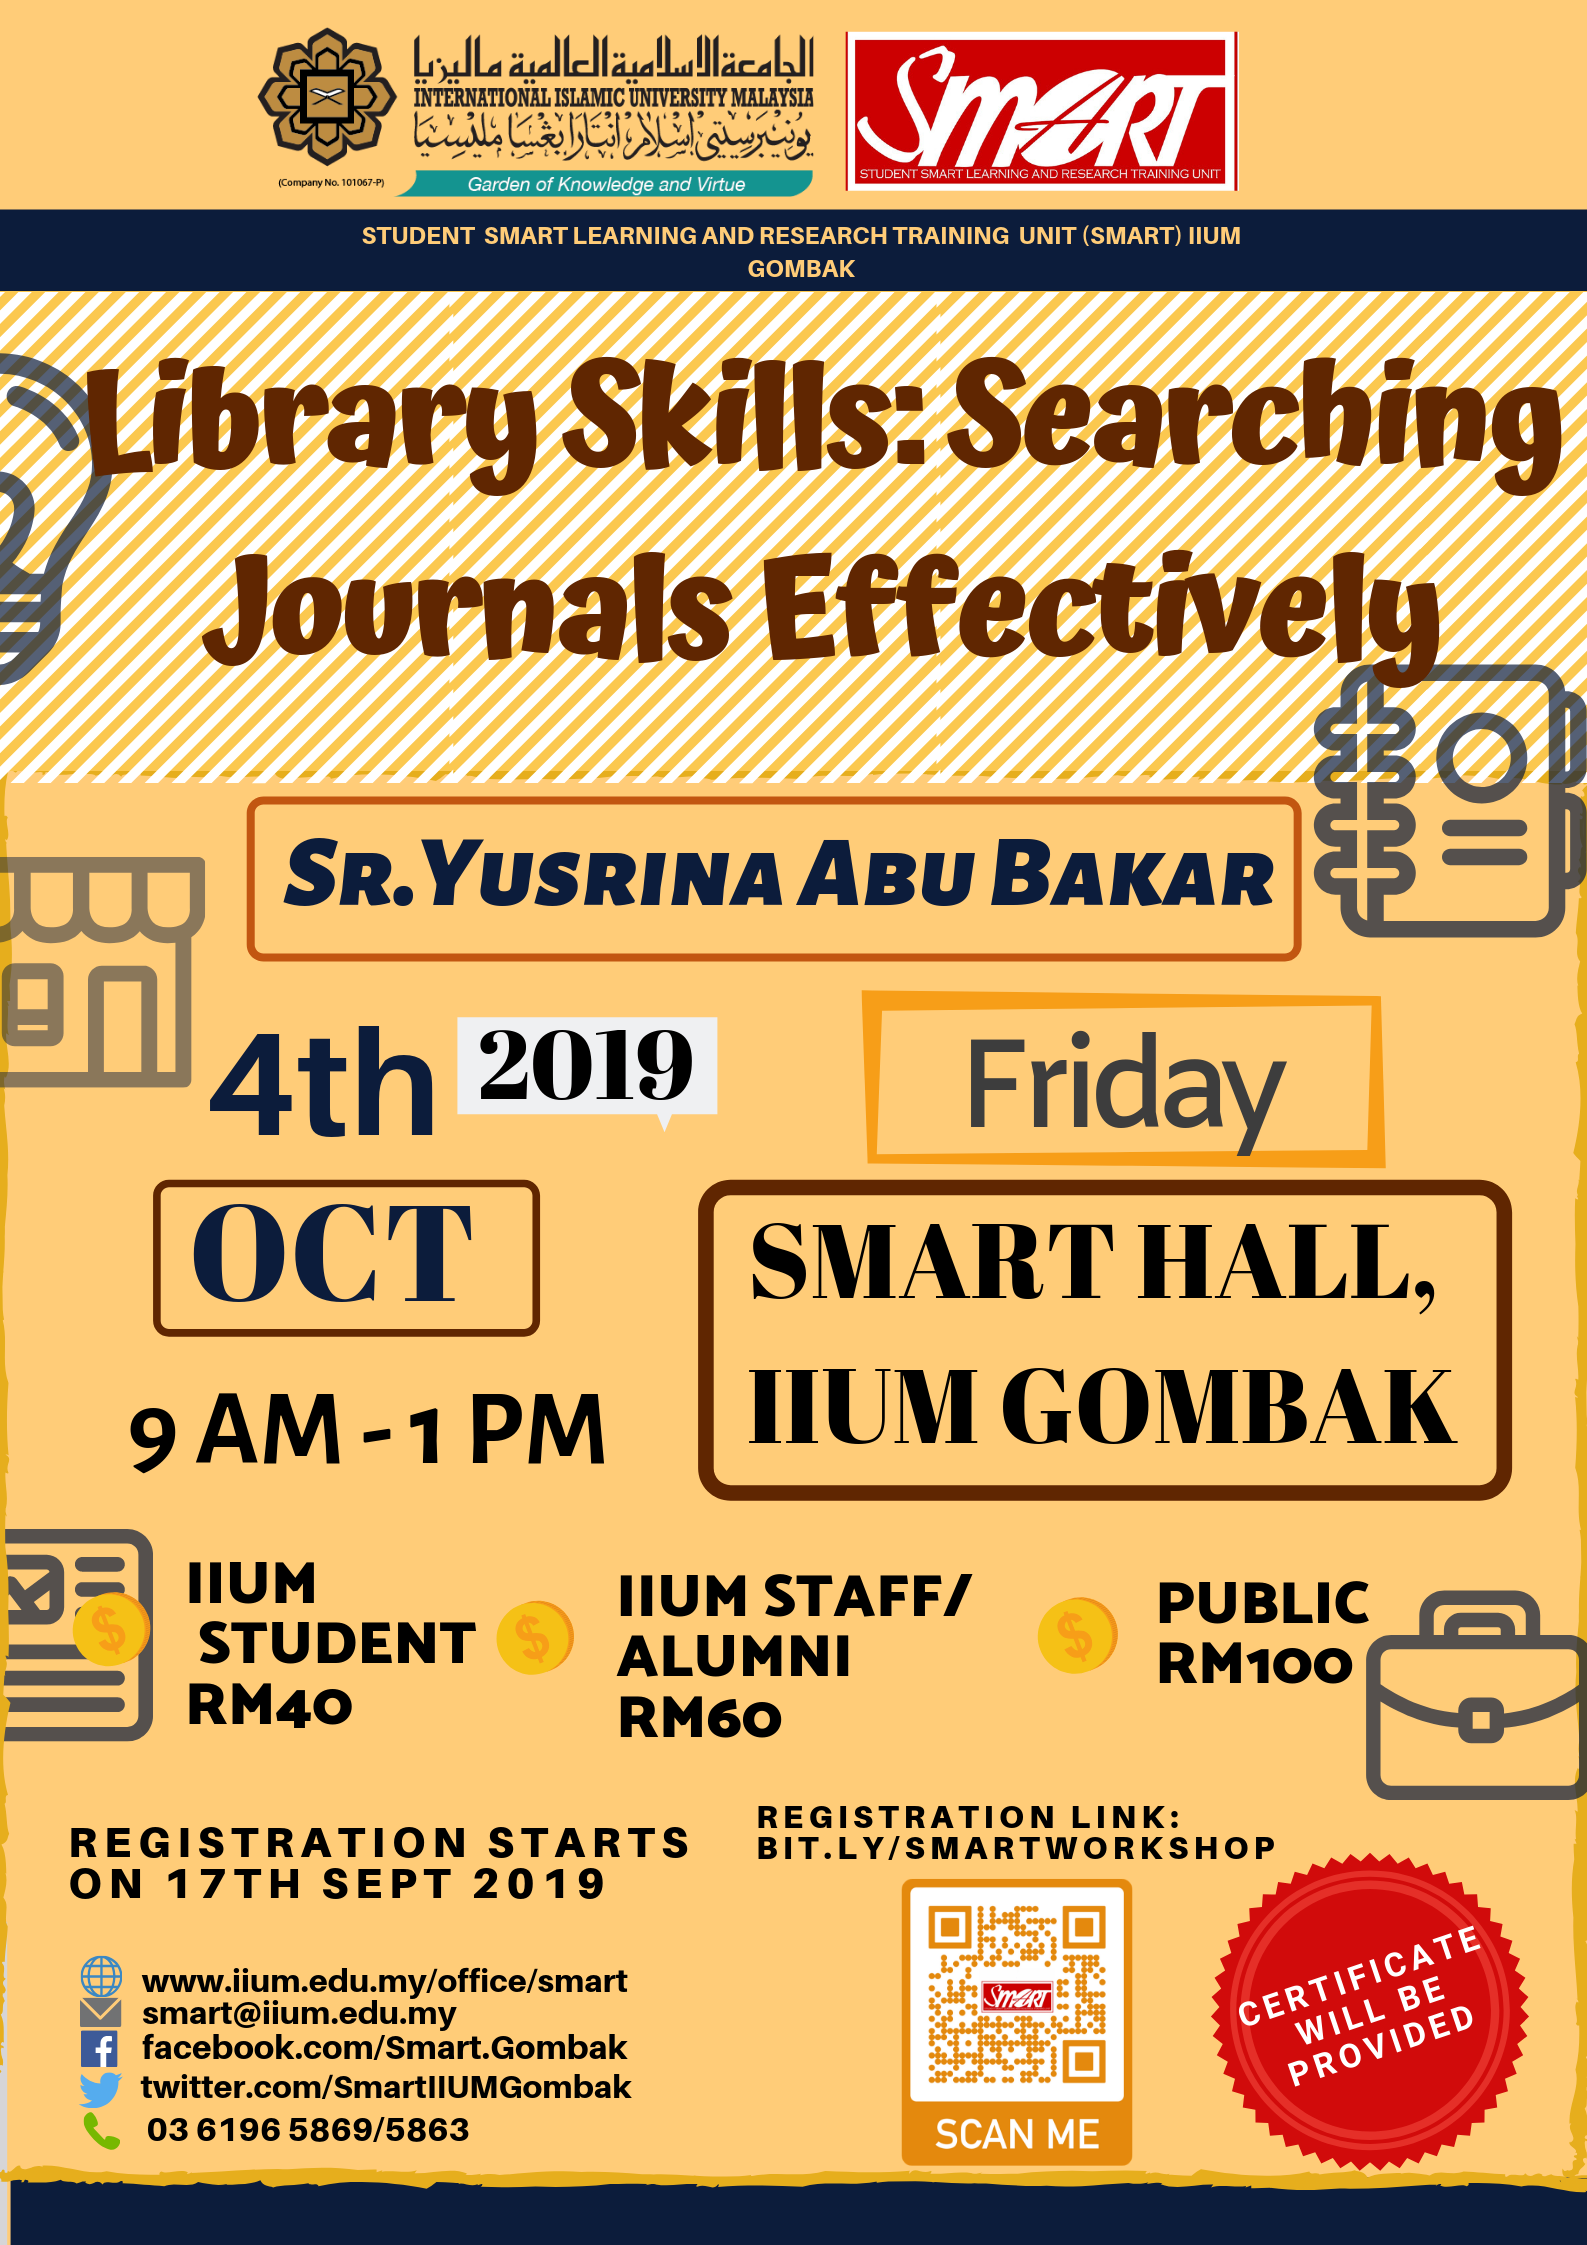 SEM 1, 19/20 - WORKSHOP - LIBRARY SKILLS : SEARCHING JOURNALS EFFECTIVELY